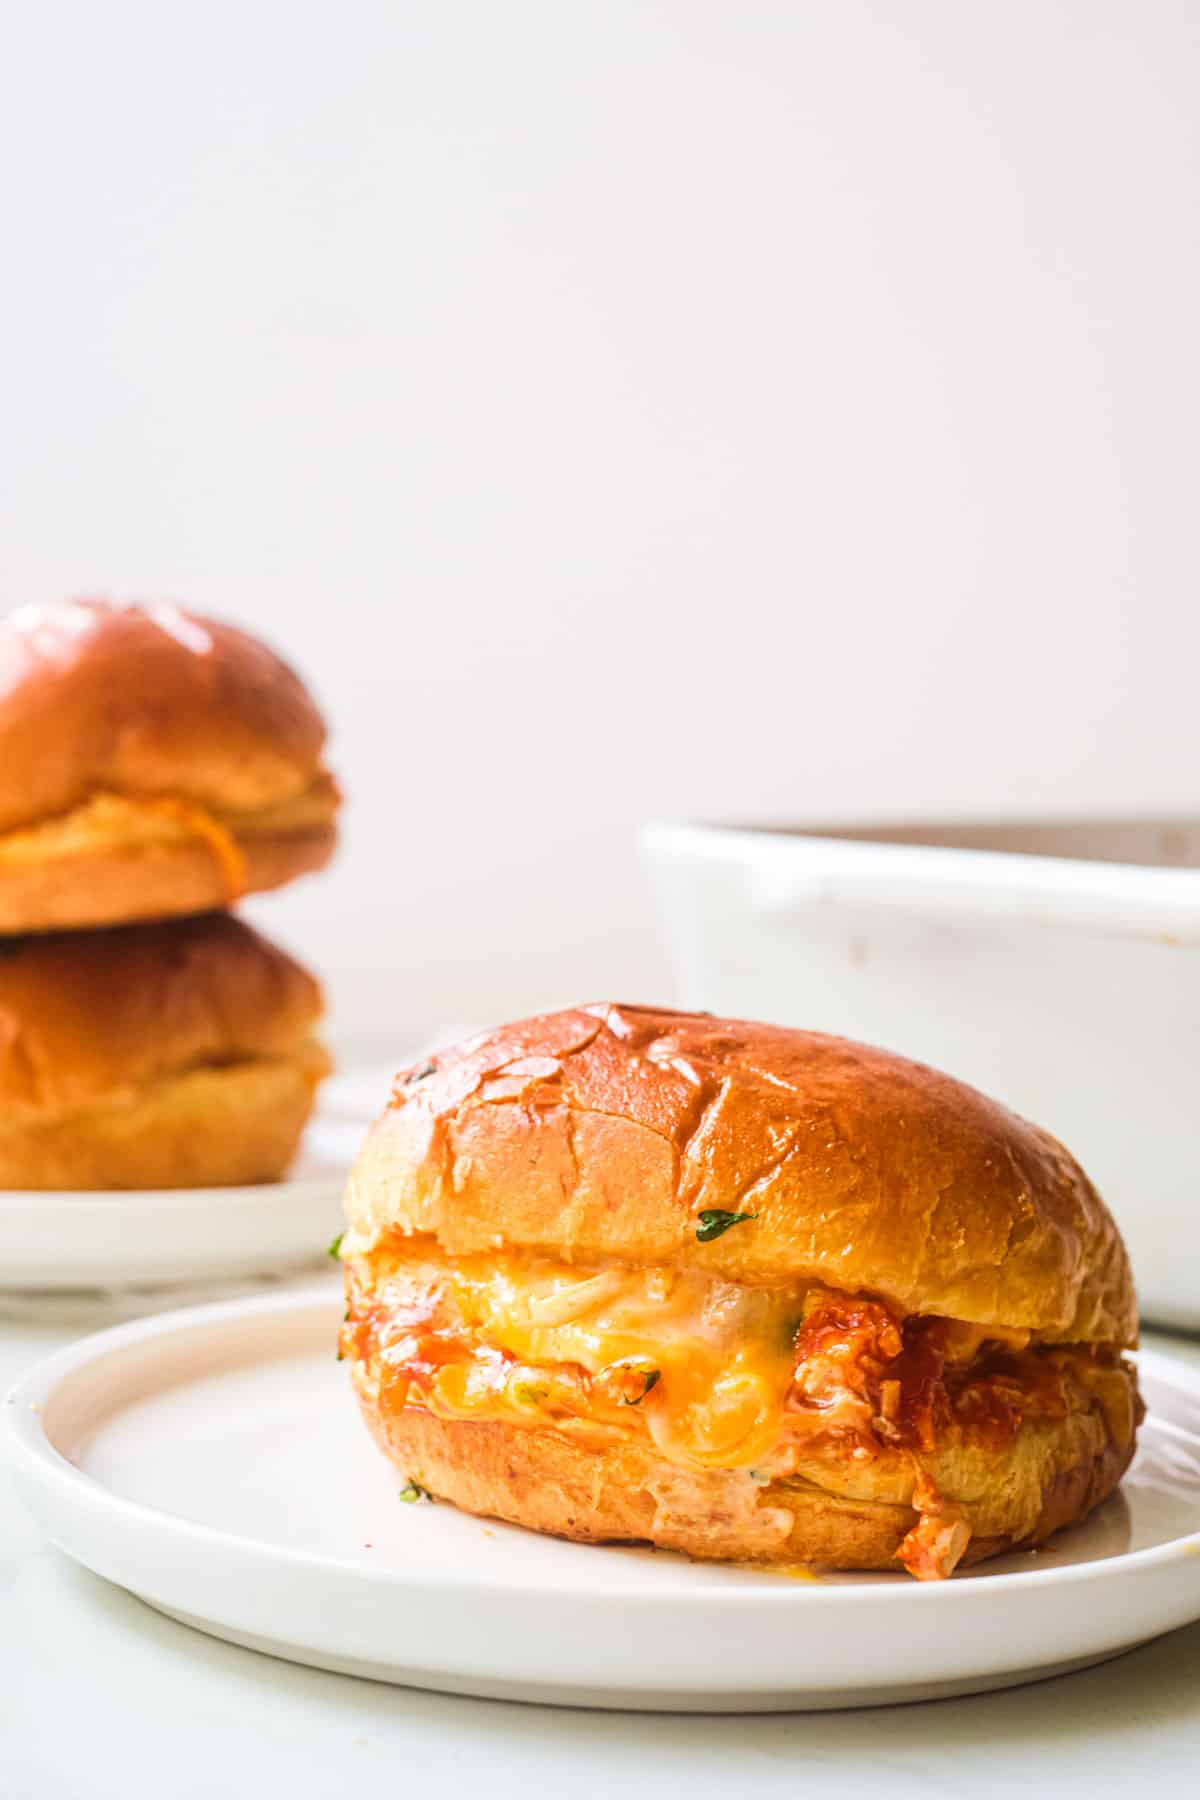 one of the completed buffalo chicken sliders served on a white dinner plate